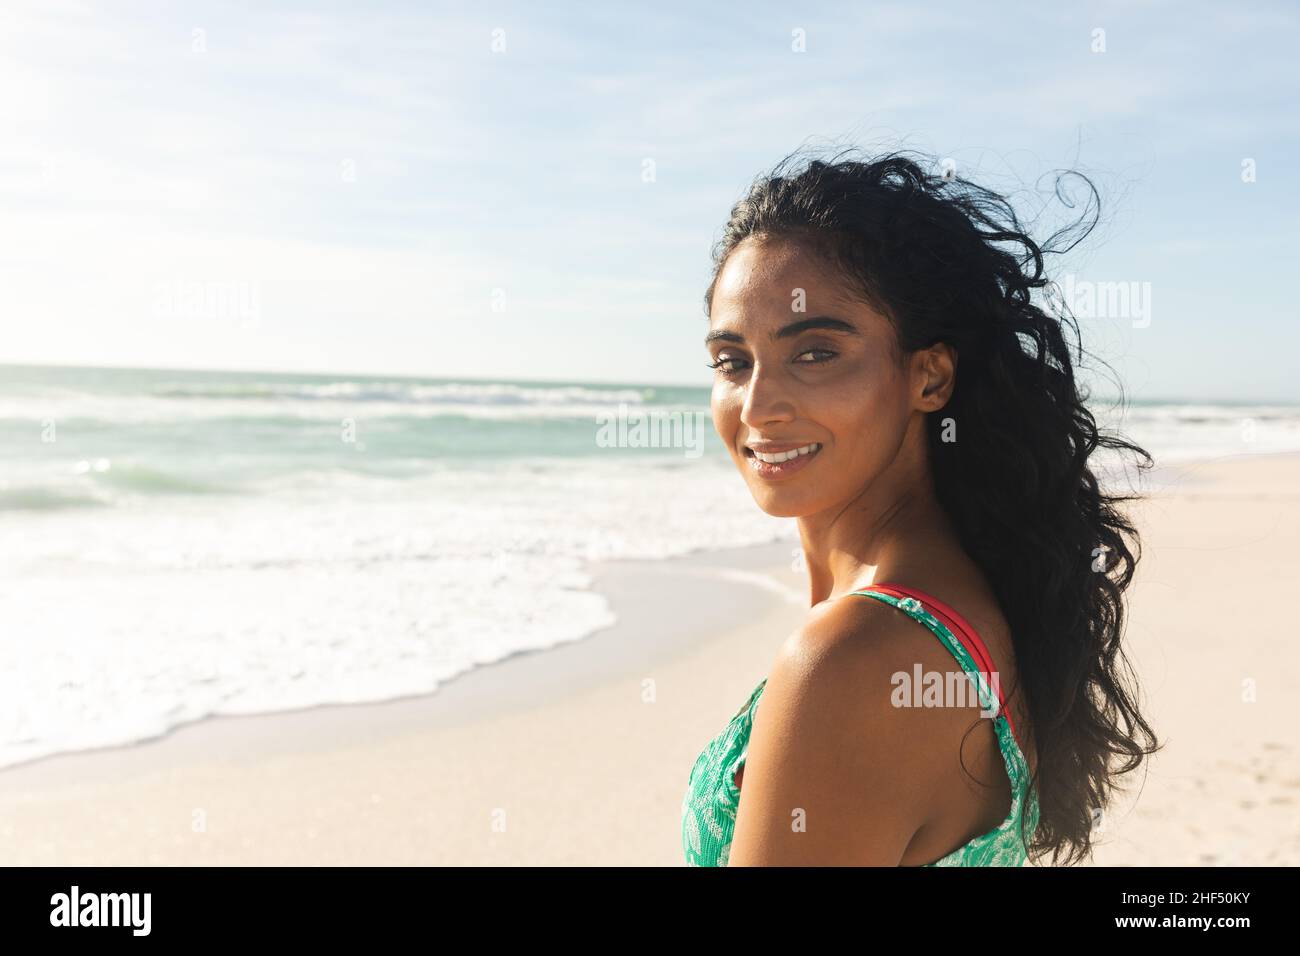 Portrait of smiling beautiful young biracial woman looking over shoulder at beach enjoying sunny day Stock Photo